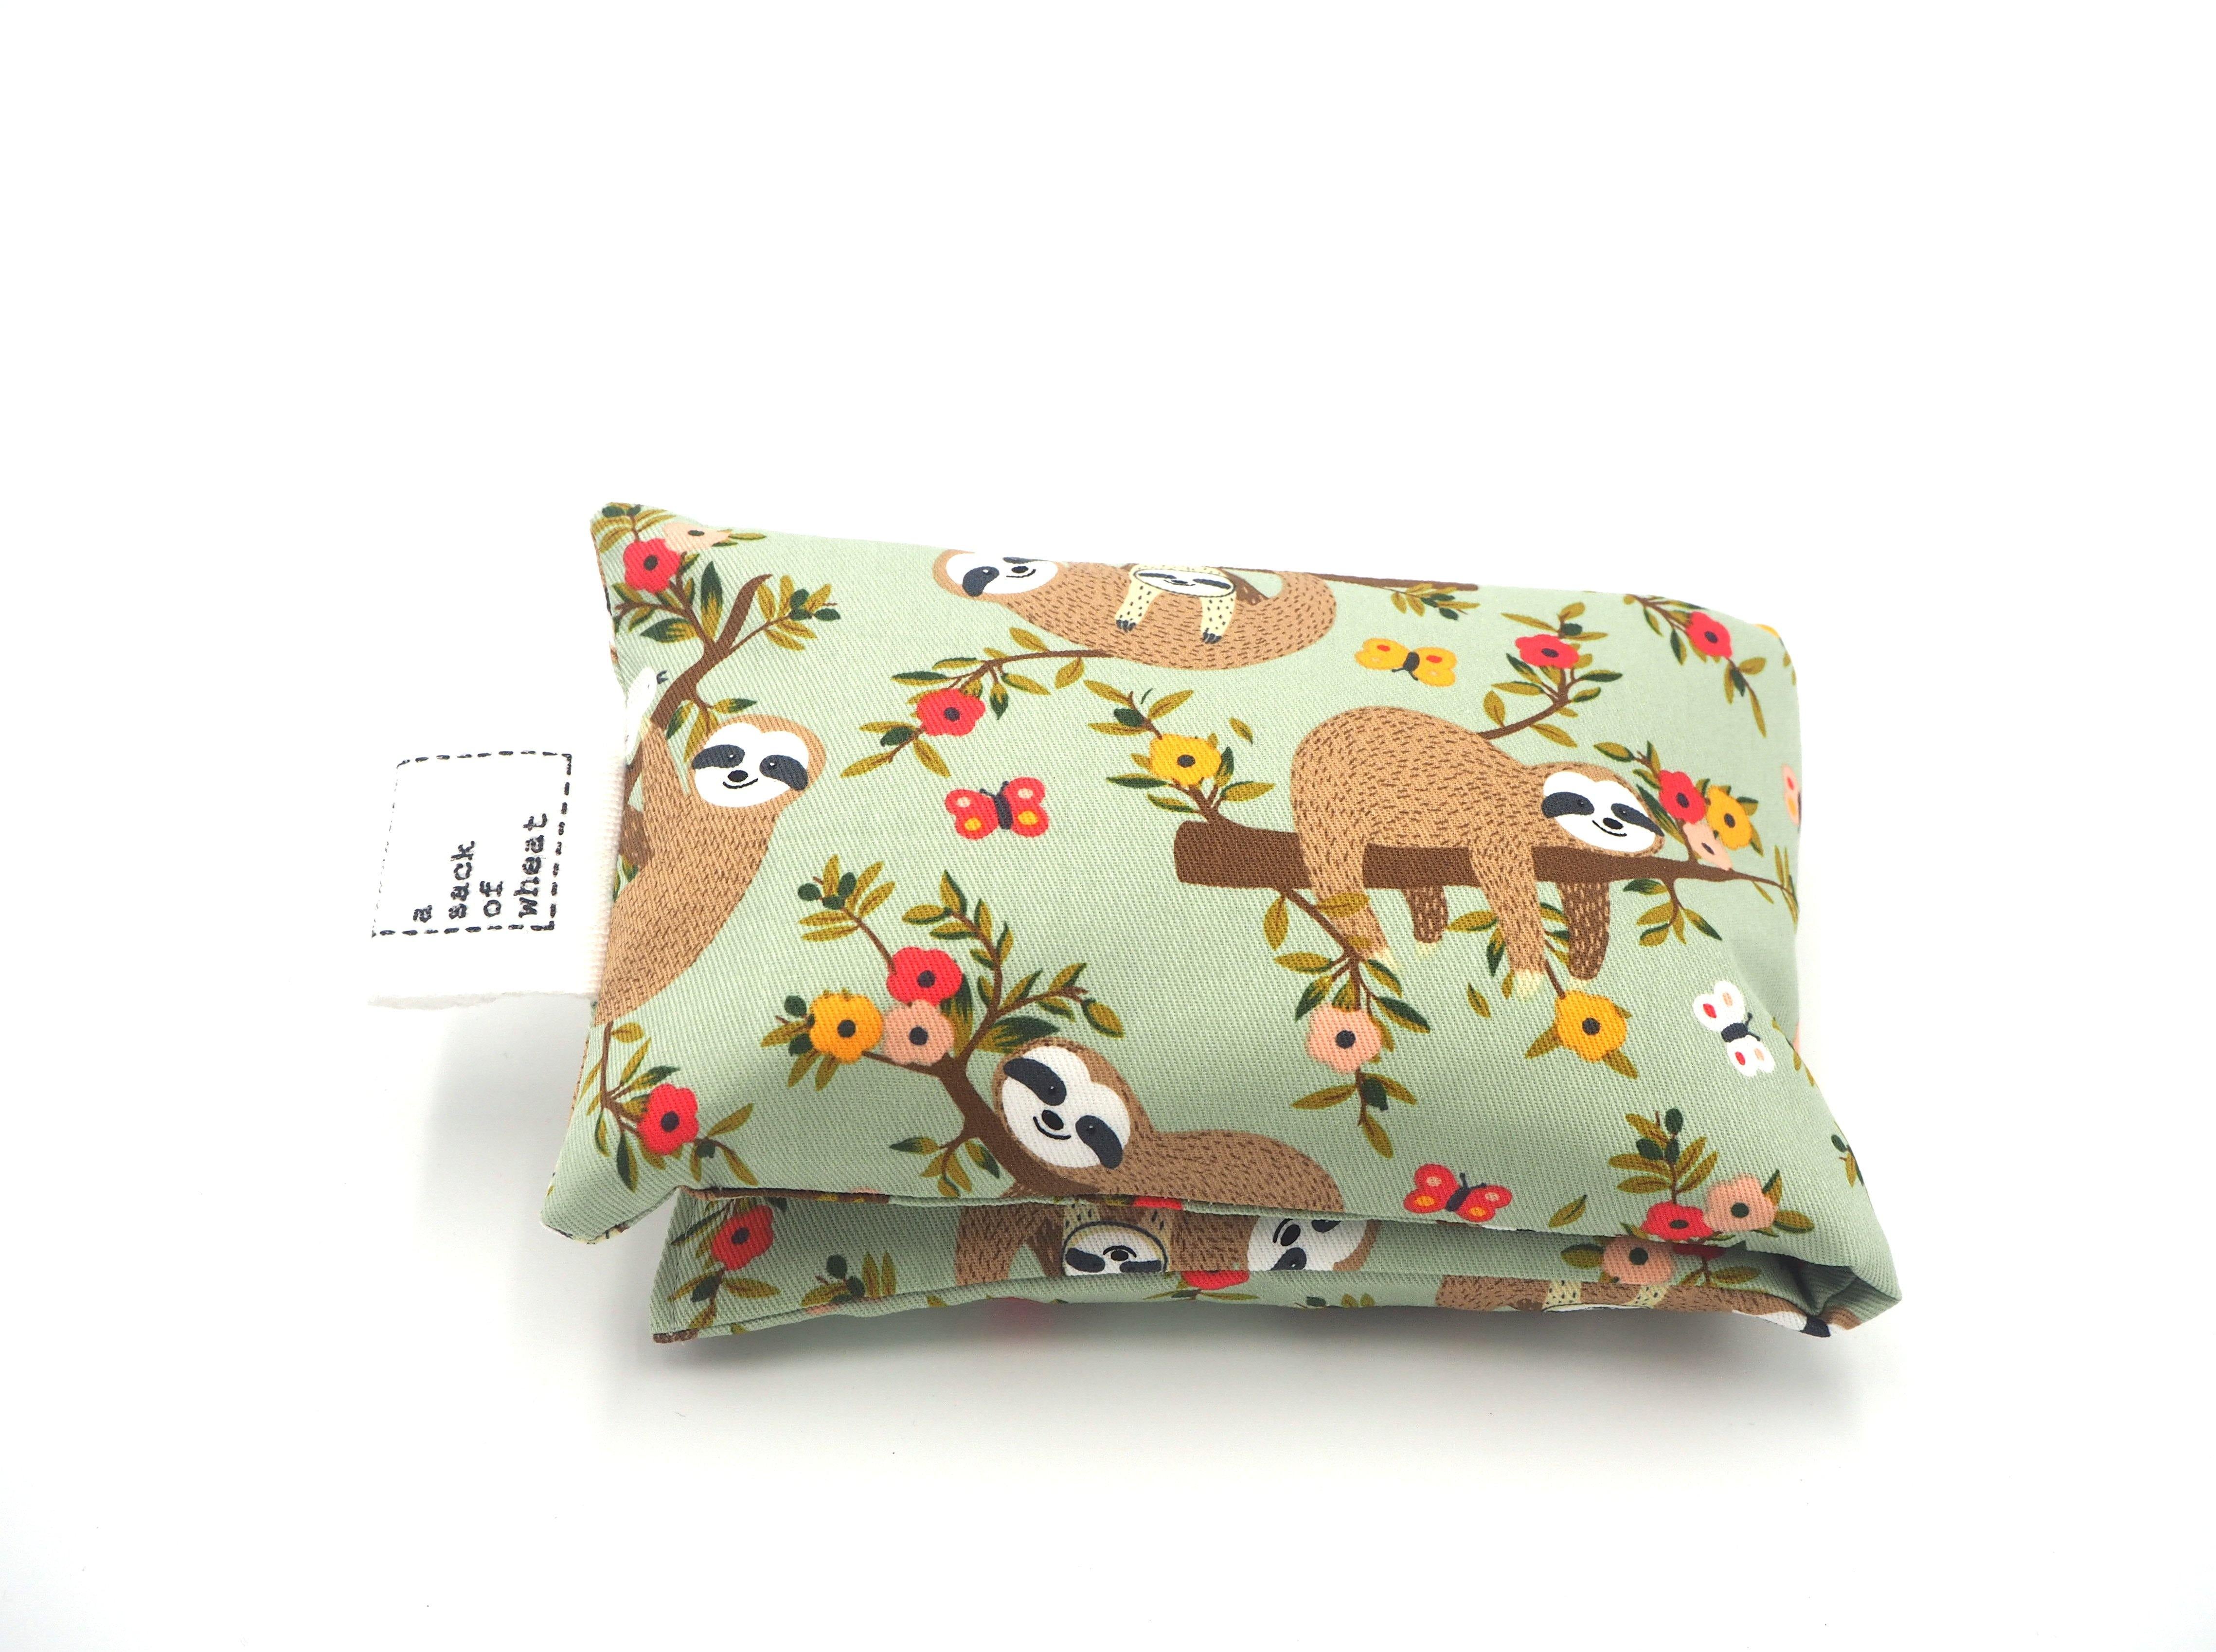 Folded view of A Sack Of Wheat, featuring Hanging Around Sloth Family images on soft green background, 100% cotton fabric